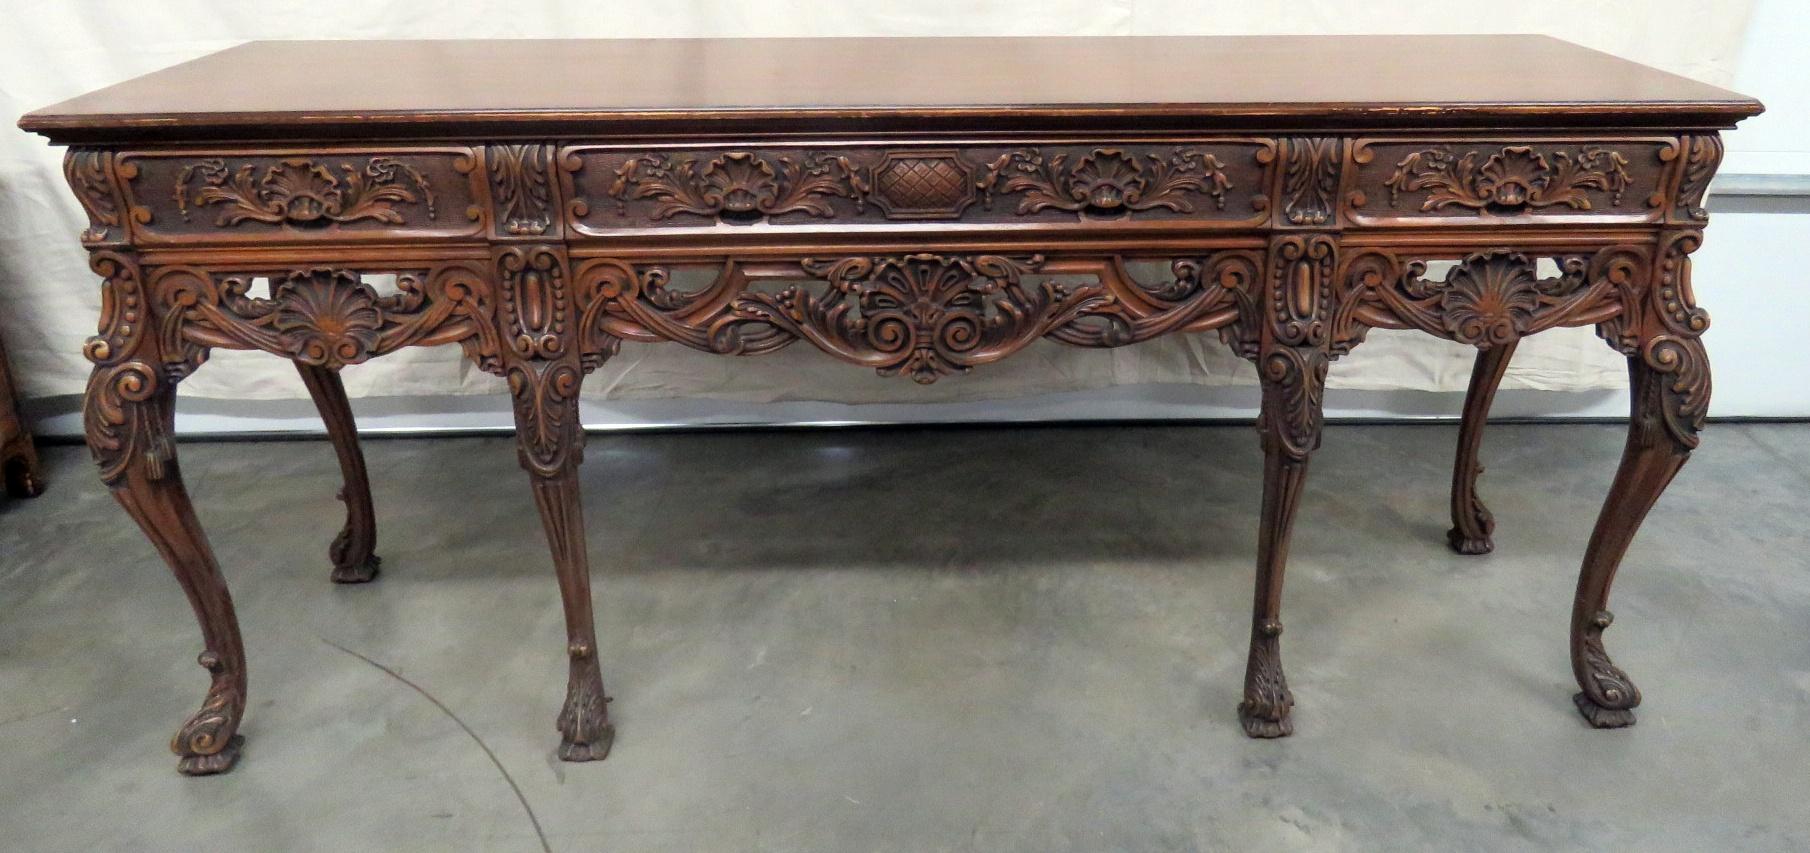 Georgian style carved 3-drawer sideboard. The end drawers are felt lined.